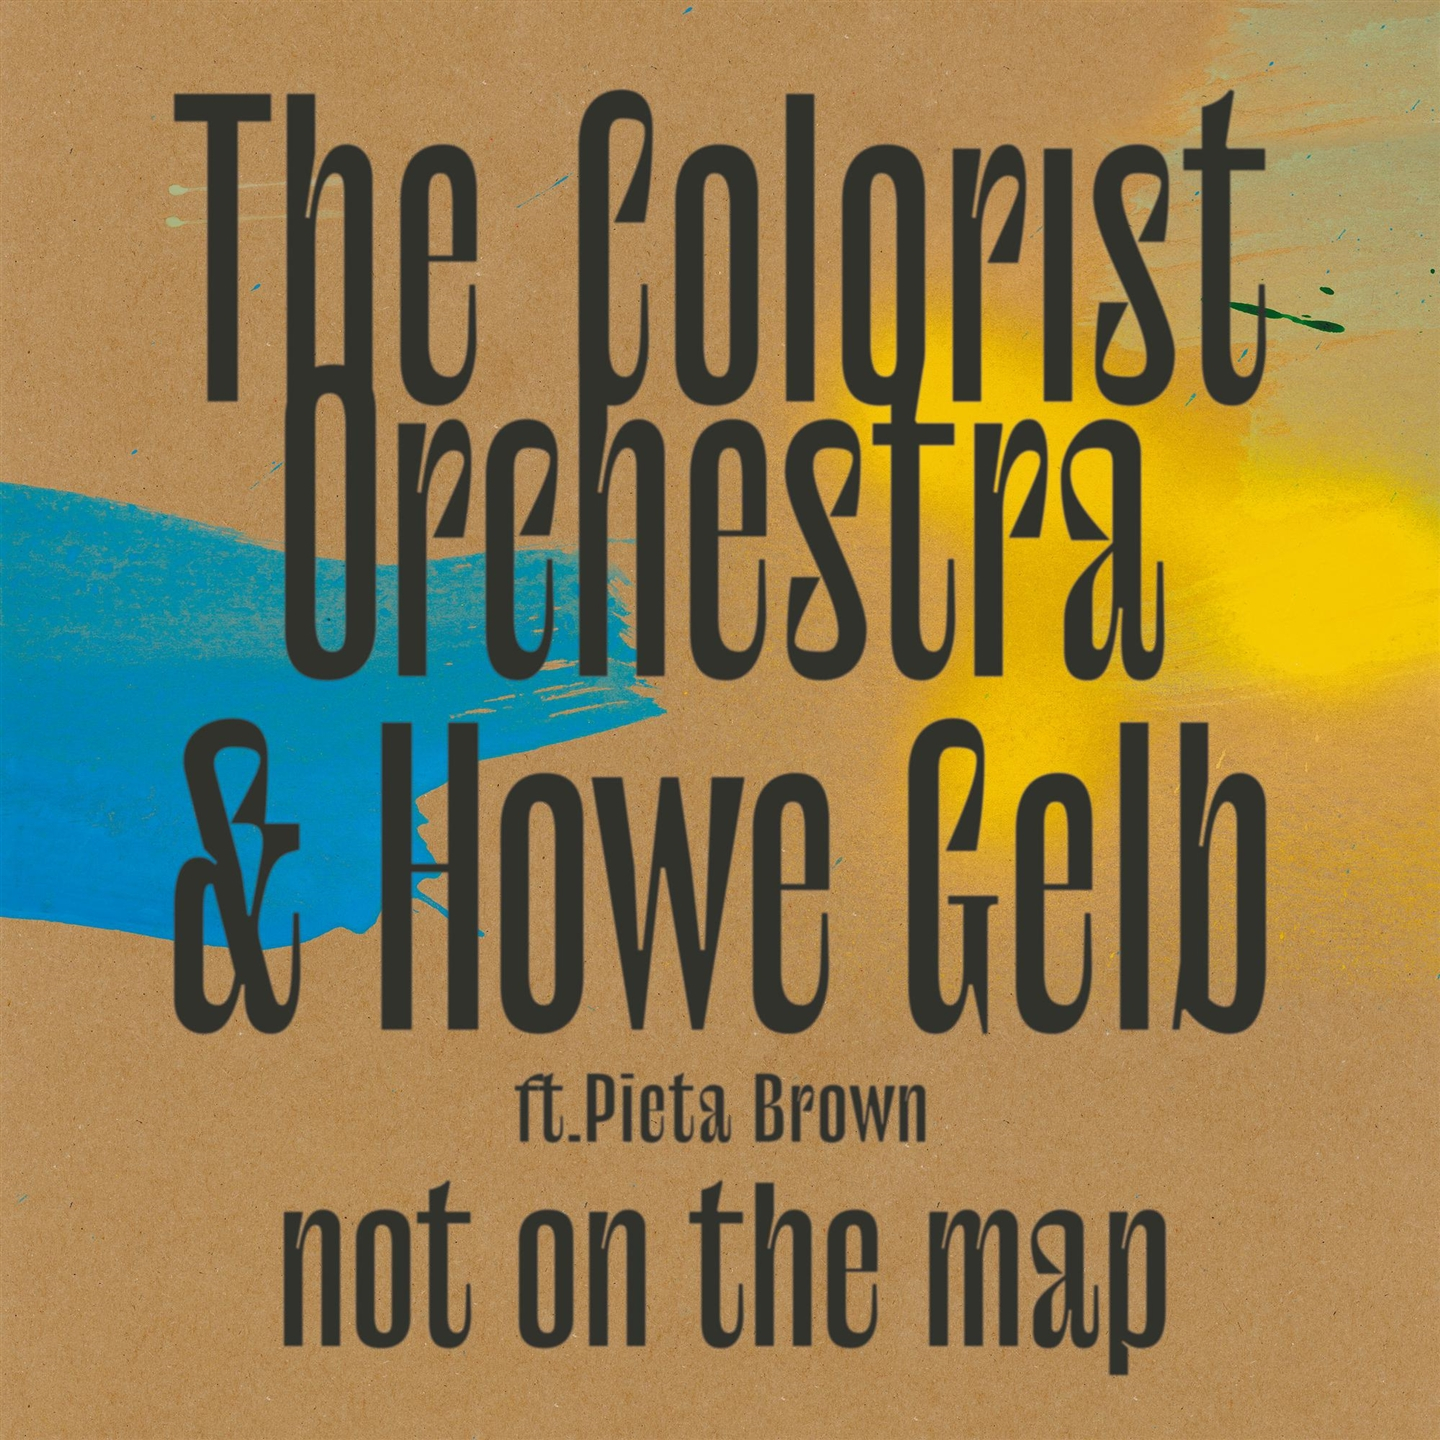 The Colorist Orchestra - Not On The Map [Lp] - Foto 1 di 1